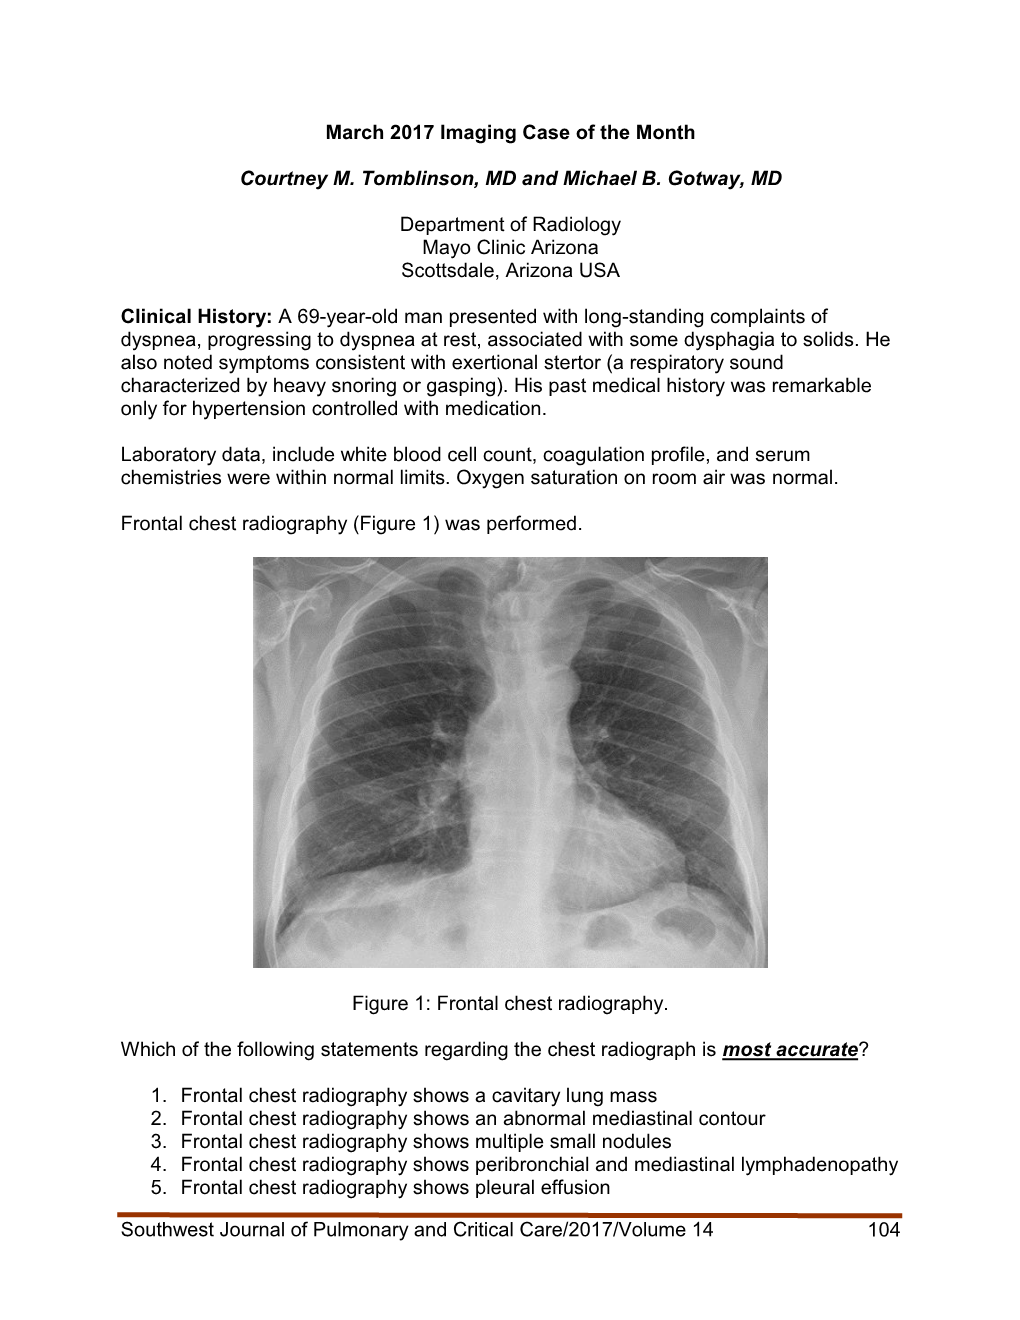 Southwest Journal of Pulmonary and Critical Care/2017/Volume 14 104 March 2017 Imaging Case of the Month Courtney M. Tomblinson